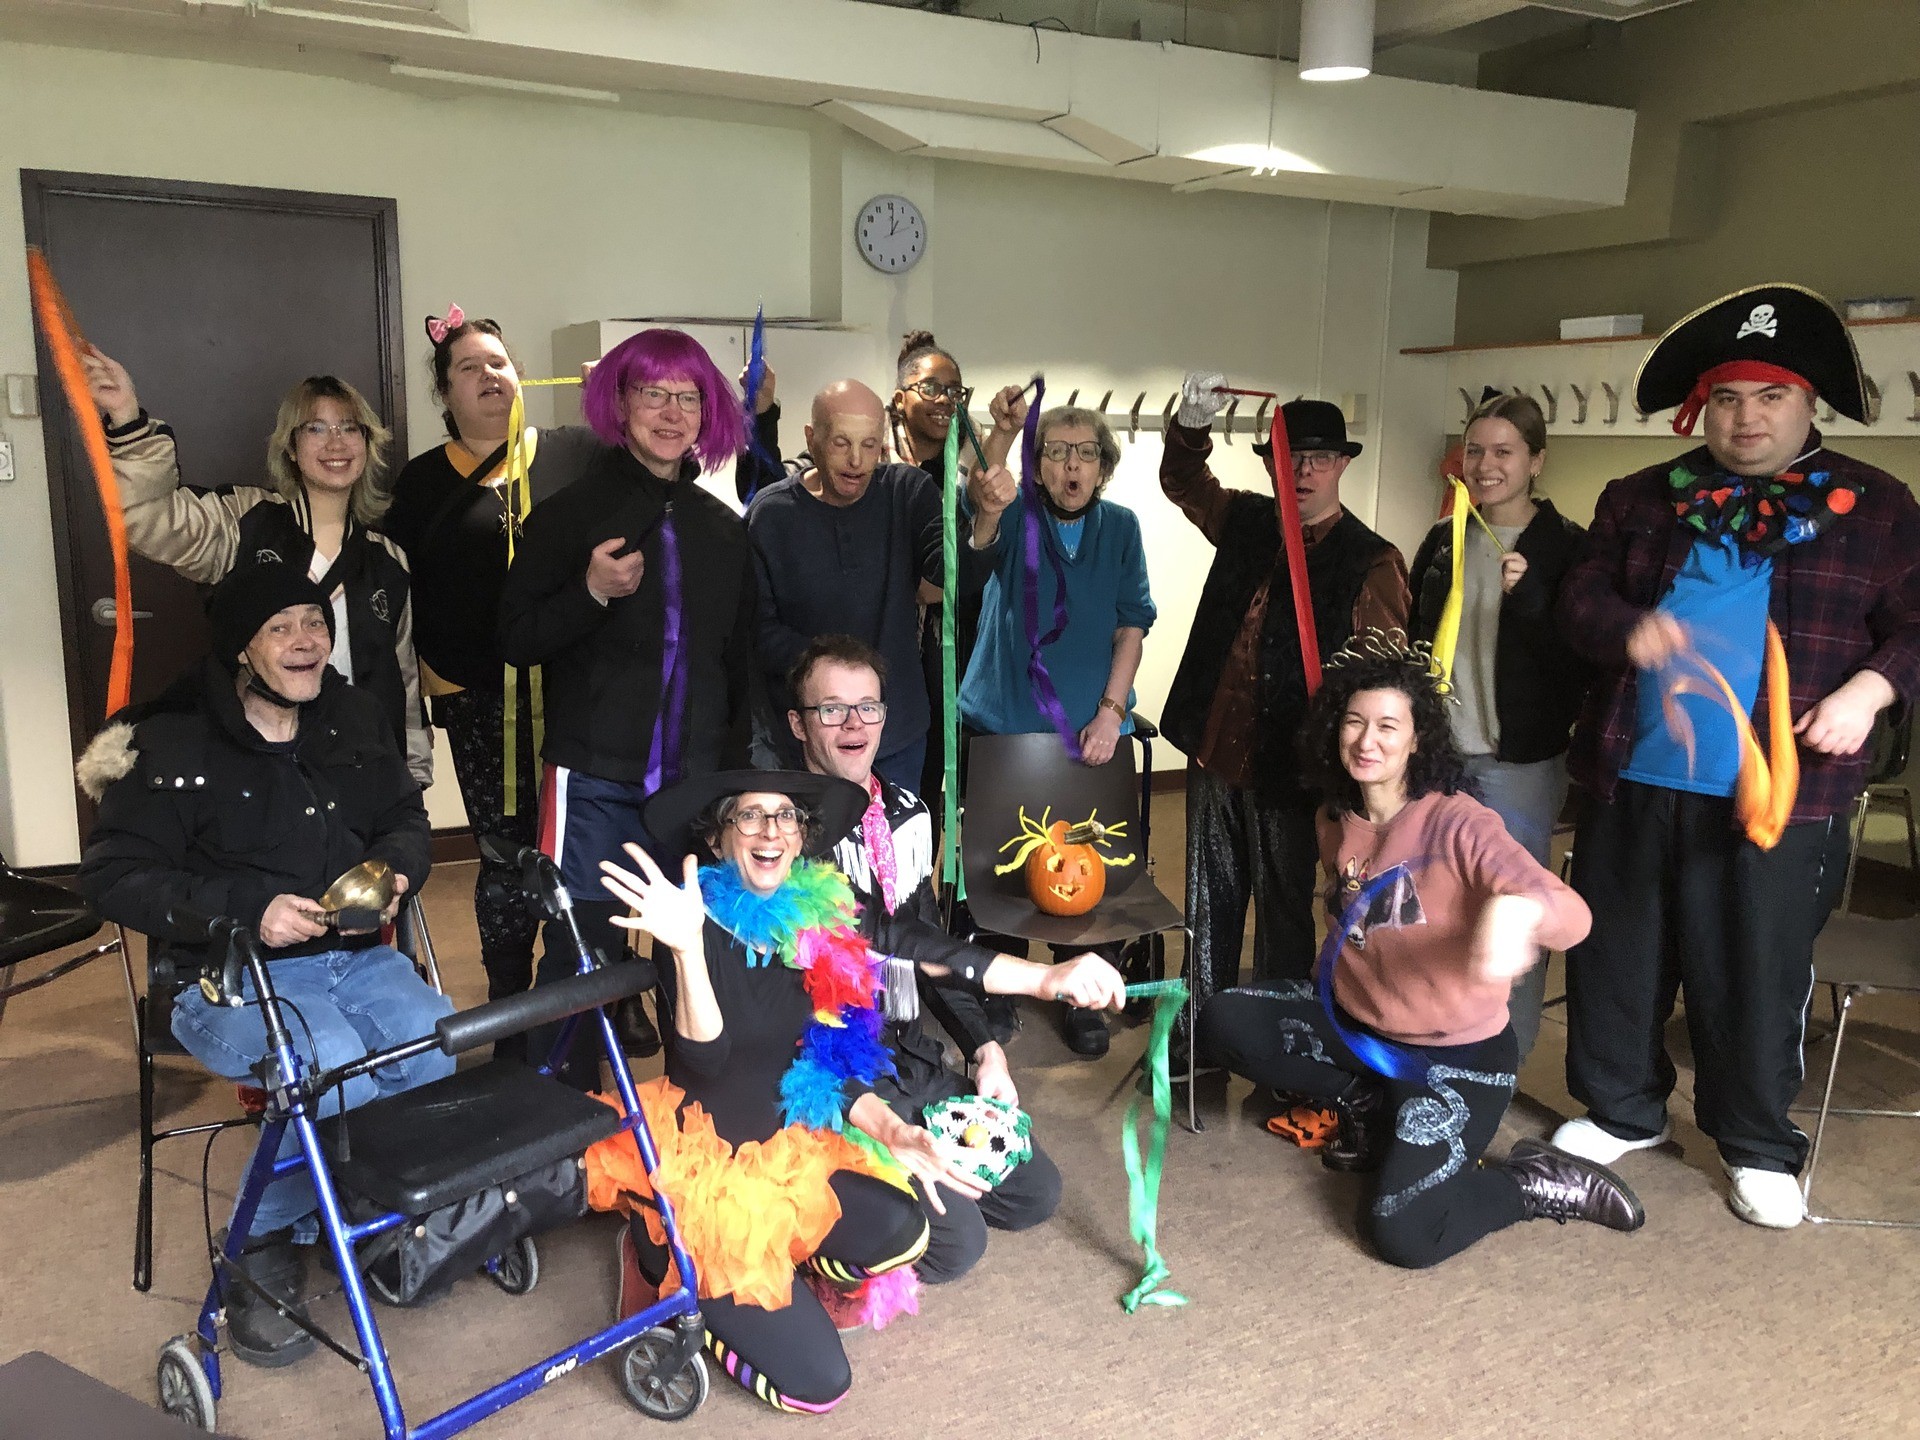 Group of adults, some dressed up, some with disabilities